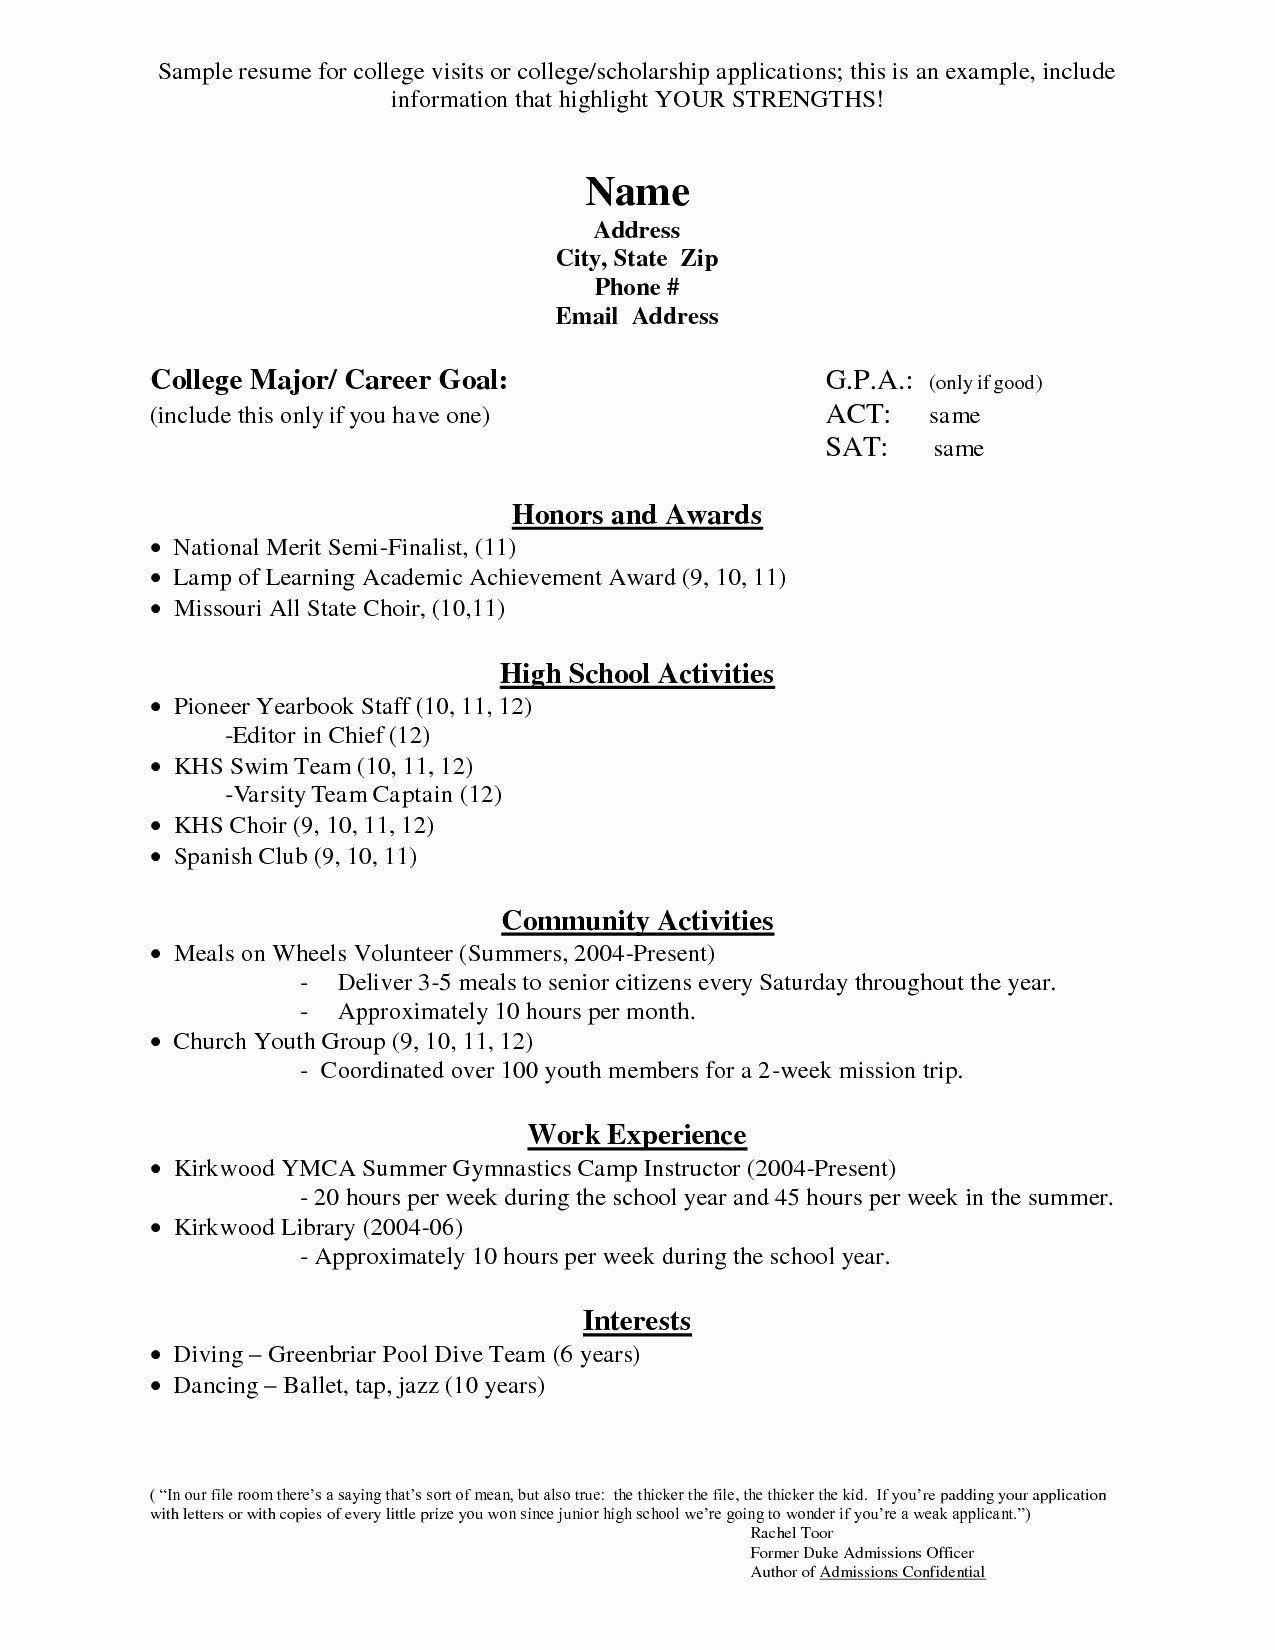 Sample High School Student Resume for College Computer Science Student Resume No Experience 010 Template Ideas …